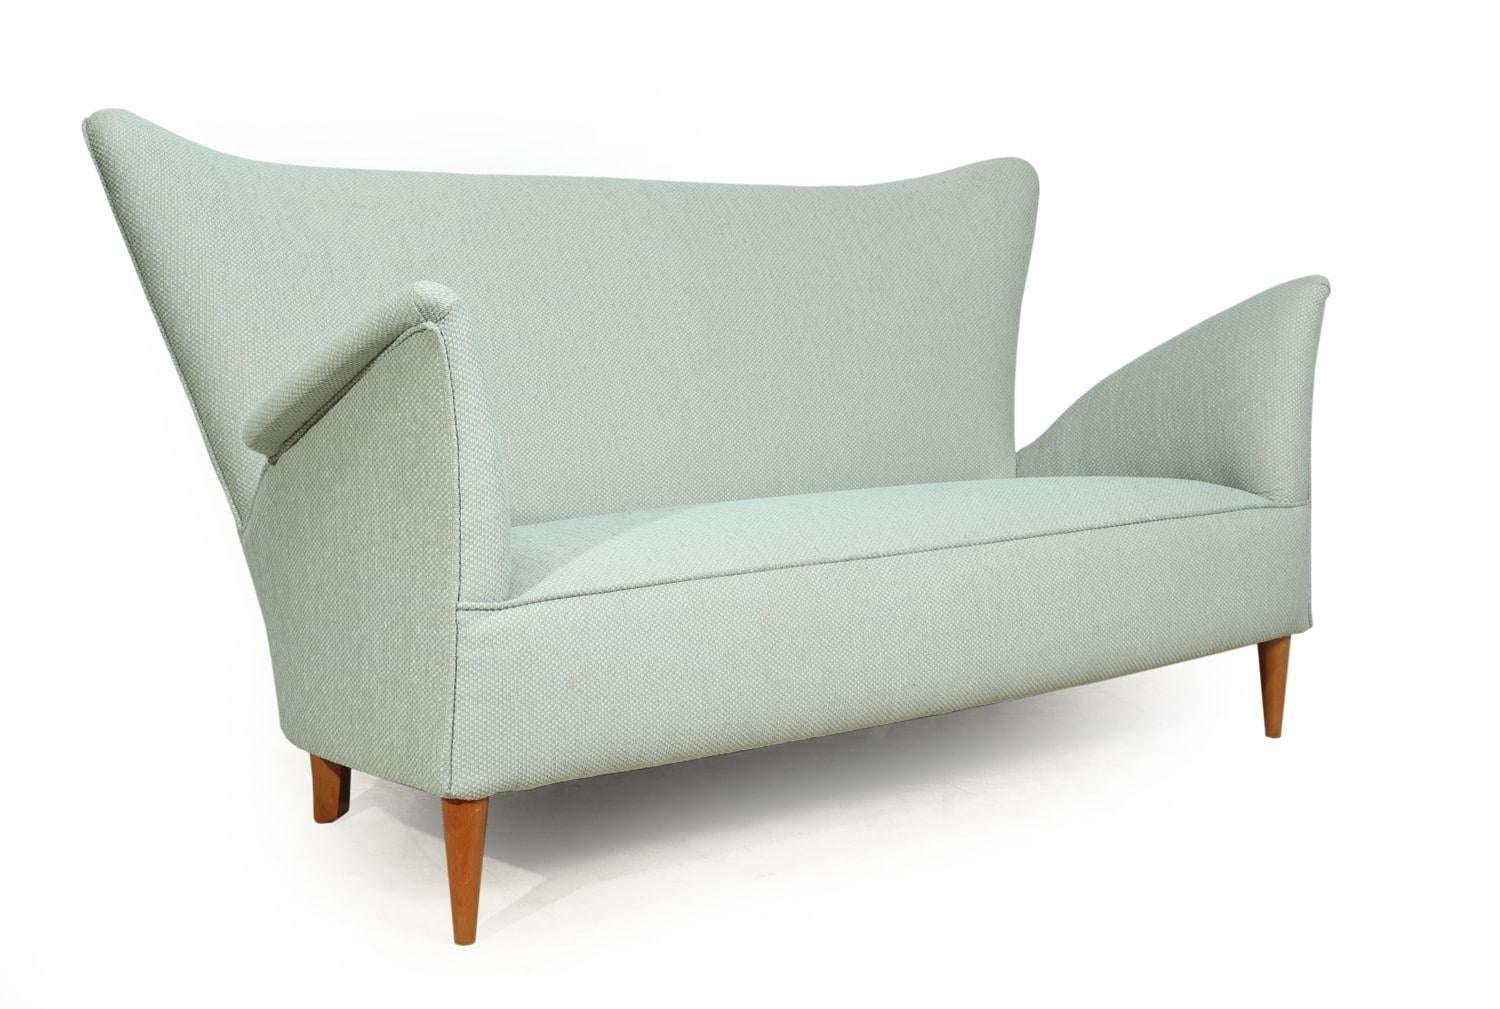 Mid-Century Modern Armchairs and Sofa by Gio Ponti for Hotel Bristol Merano, circa 1954 For Sale